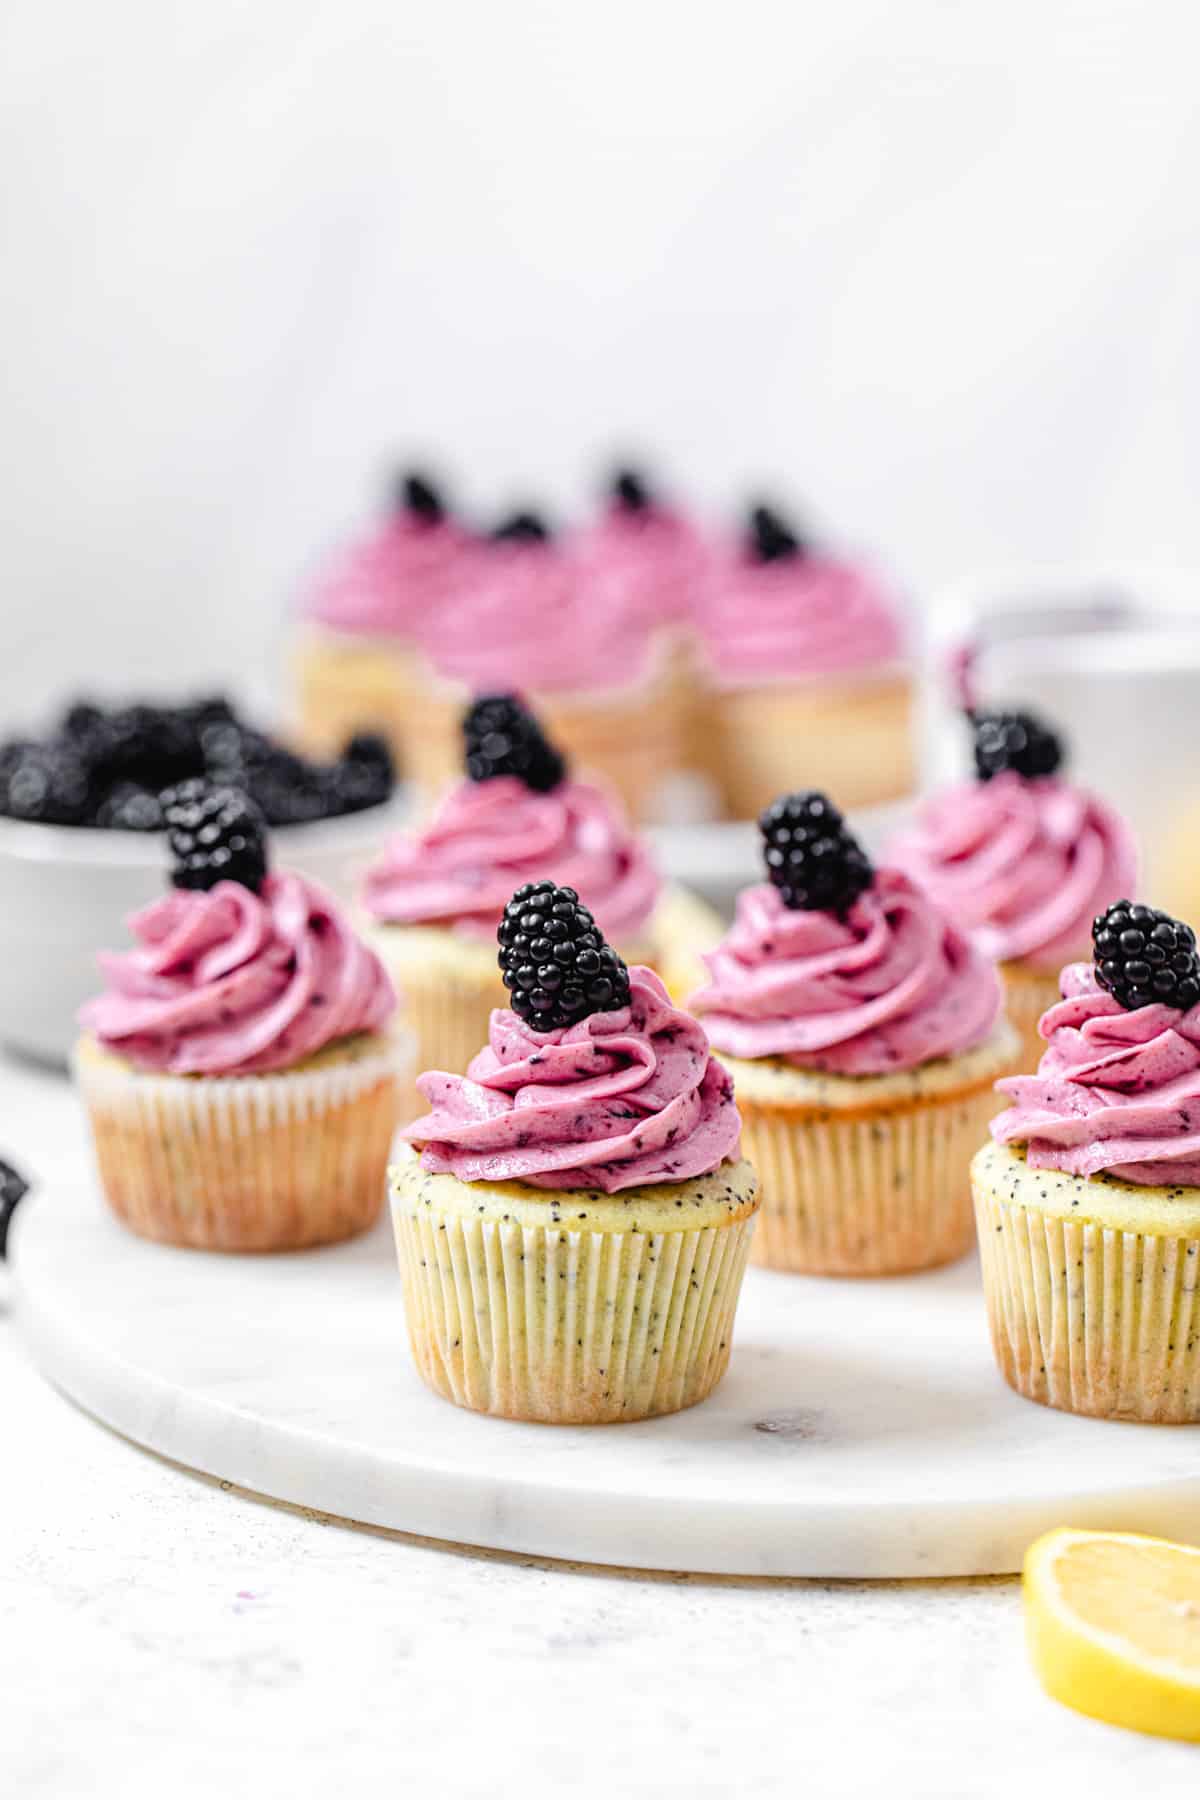 cupcakes on a round marble board with bowl of blackberries in the background